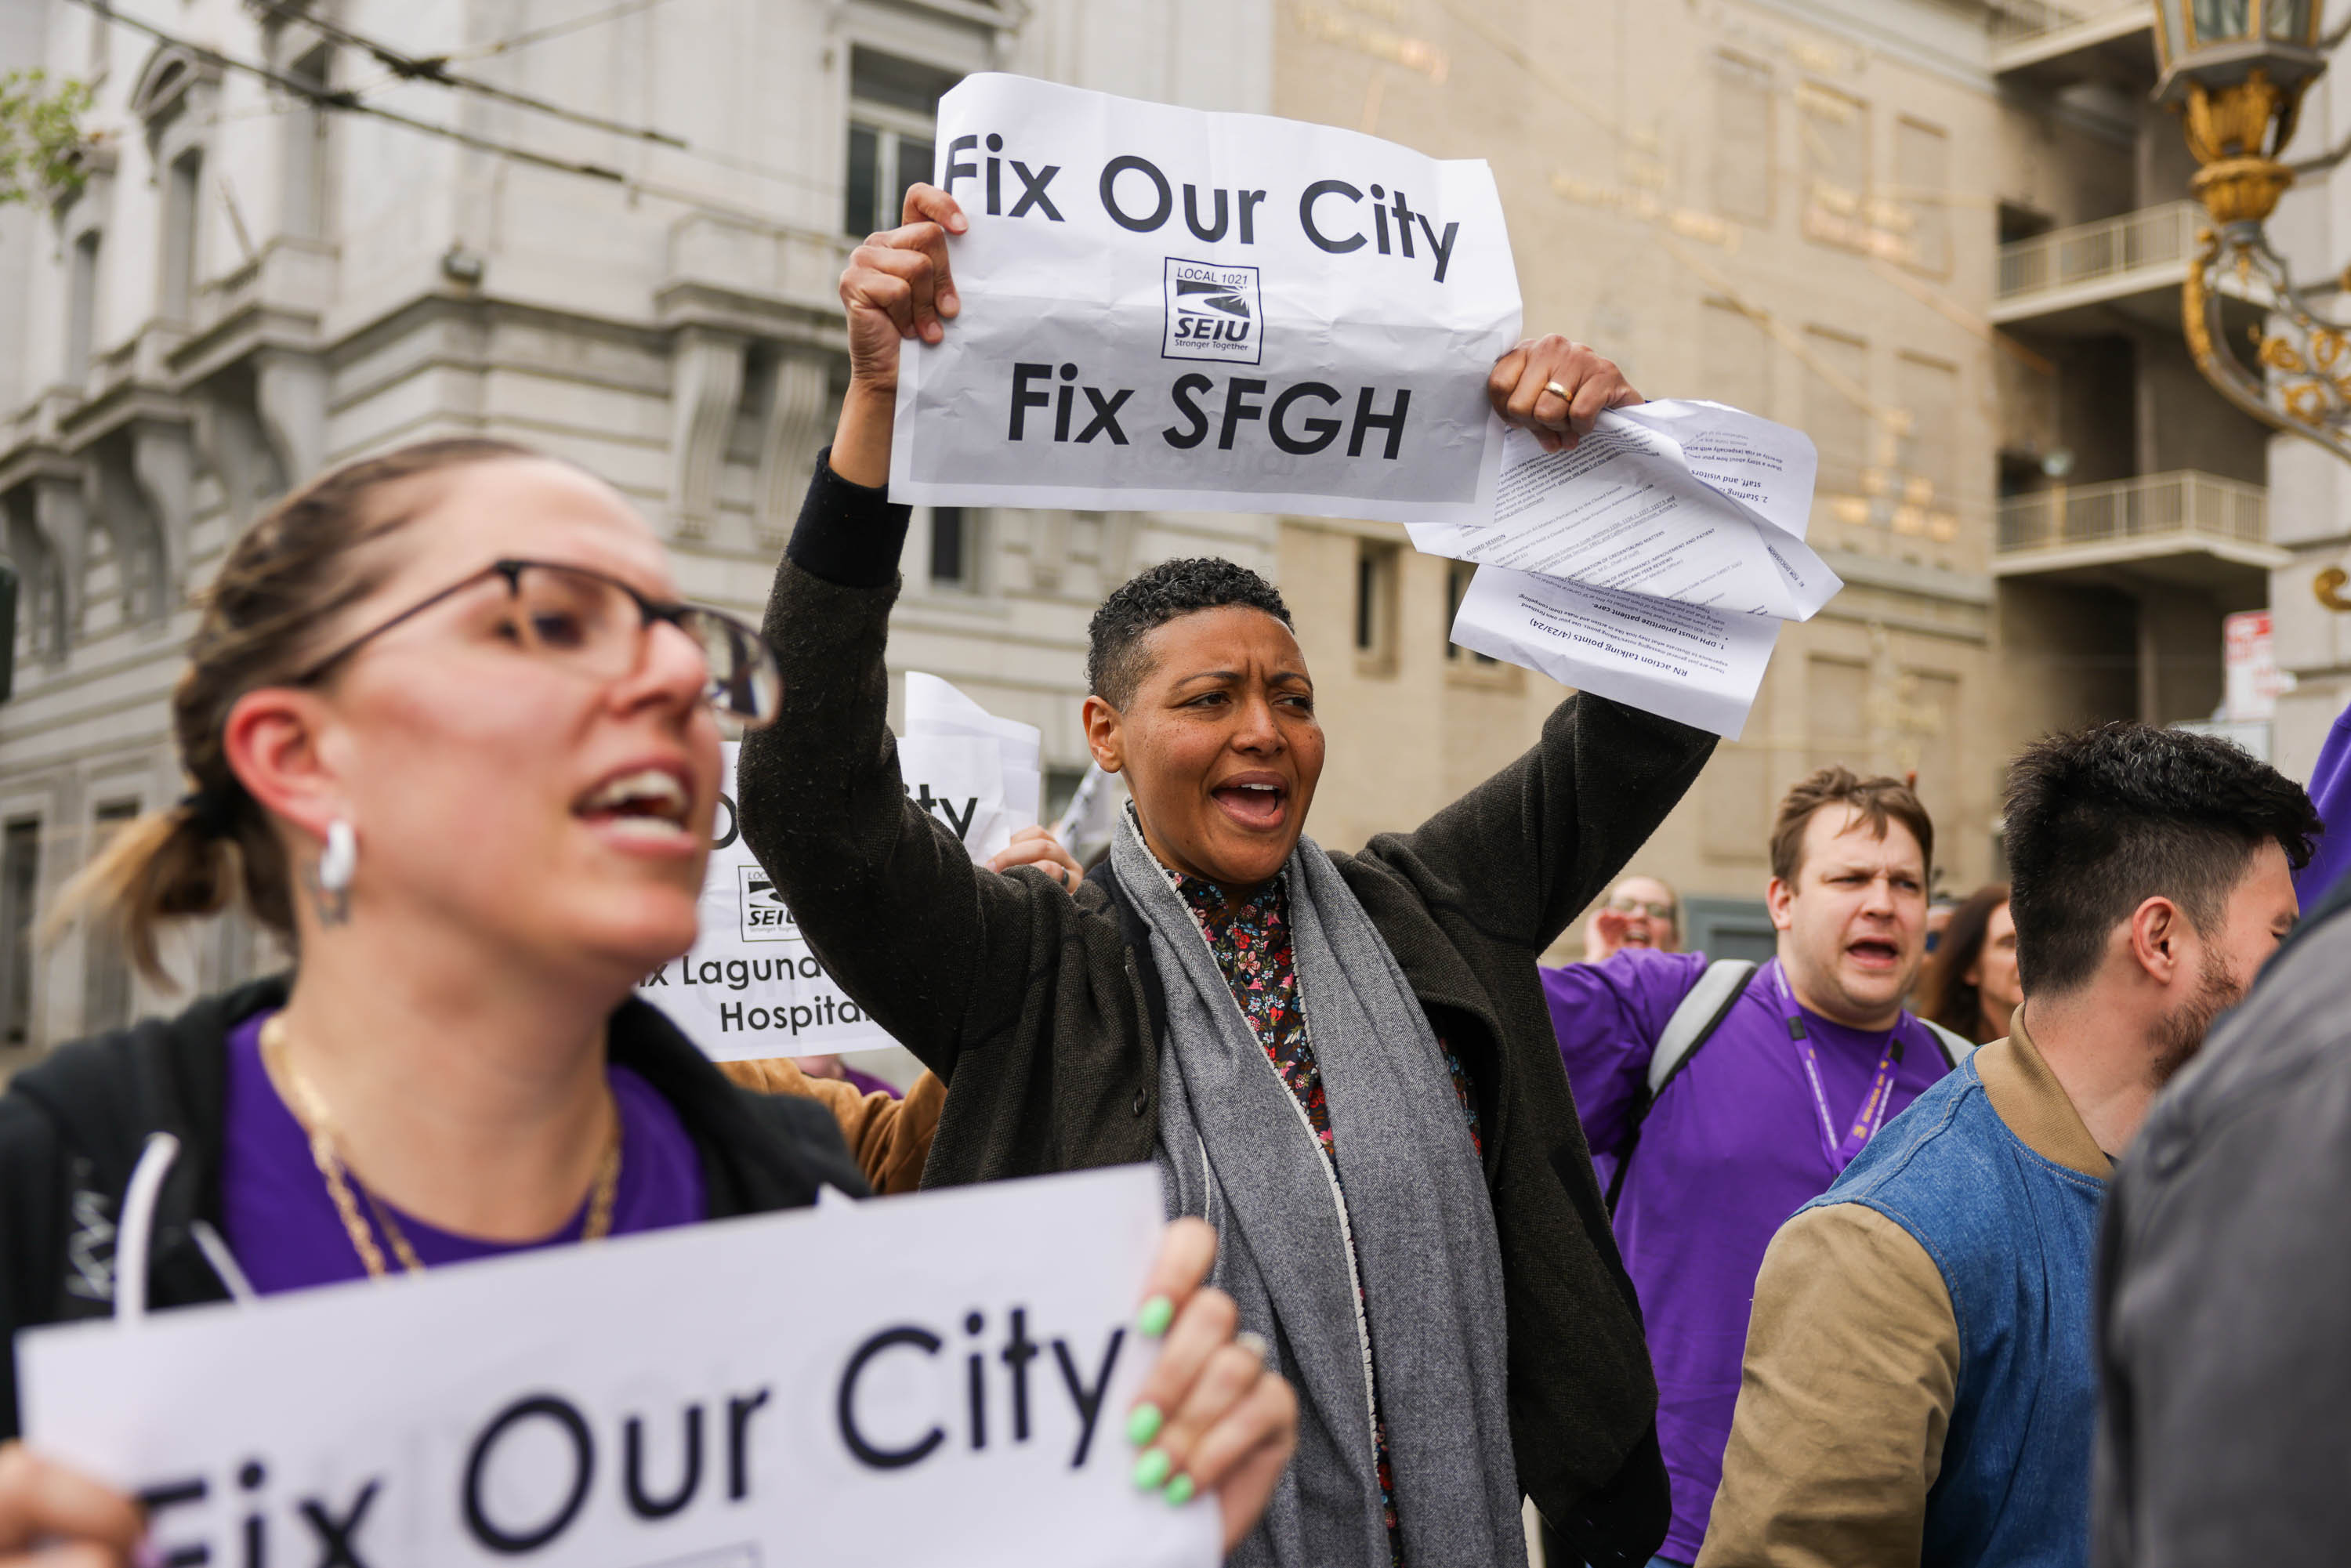 People are protesting with signs that read "Fix Our City" and "Fix SFGH," showing strong emotions.